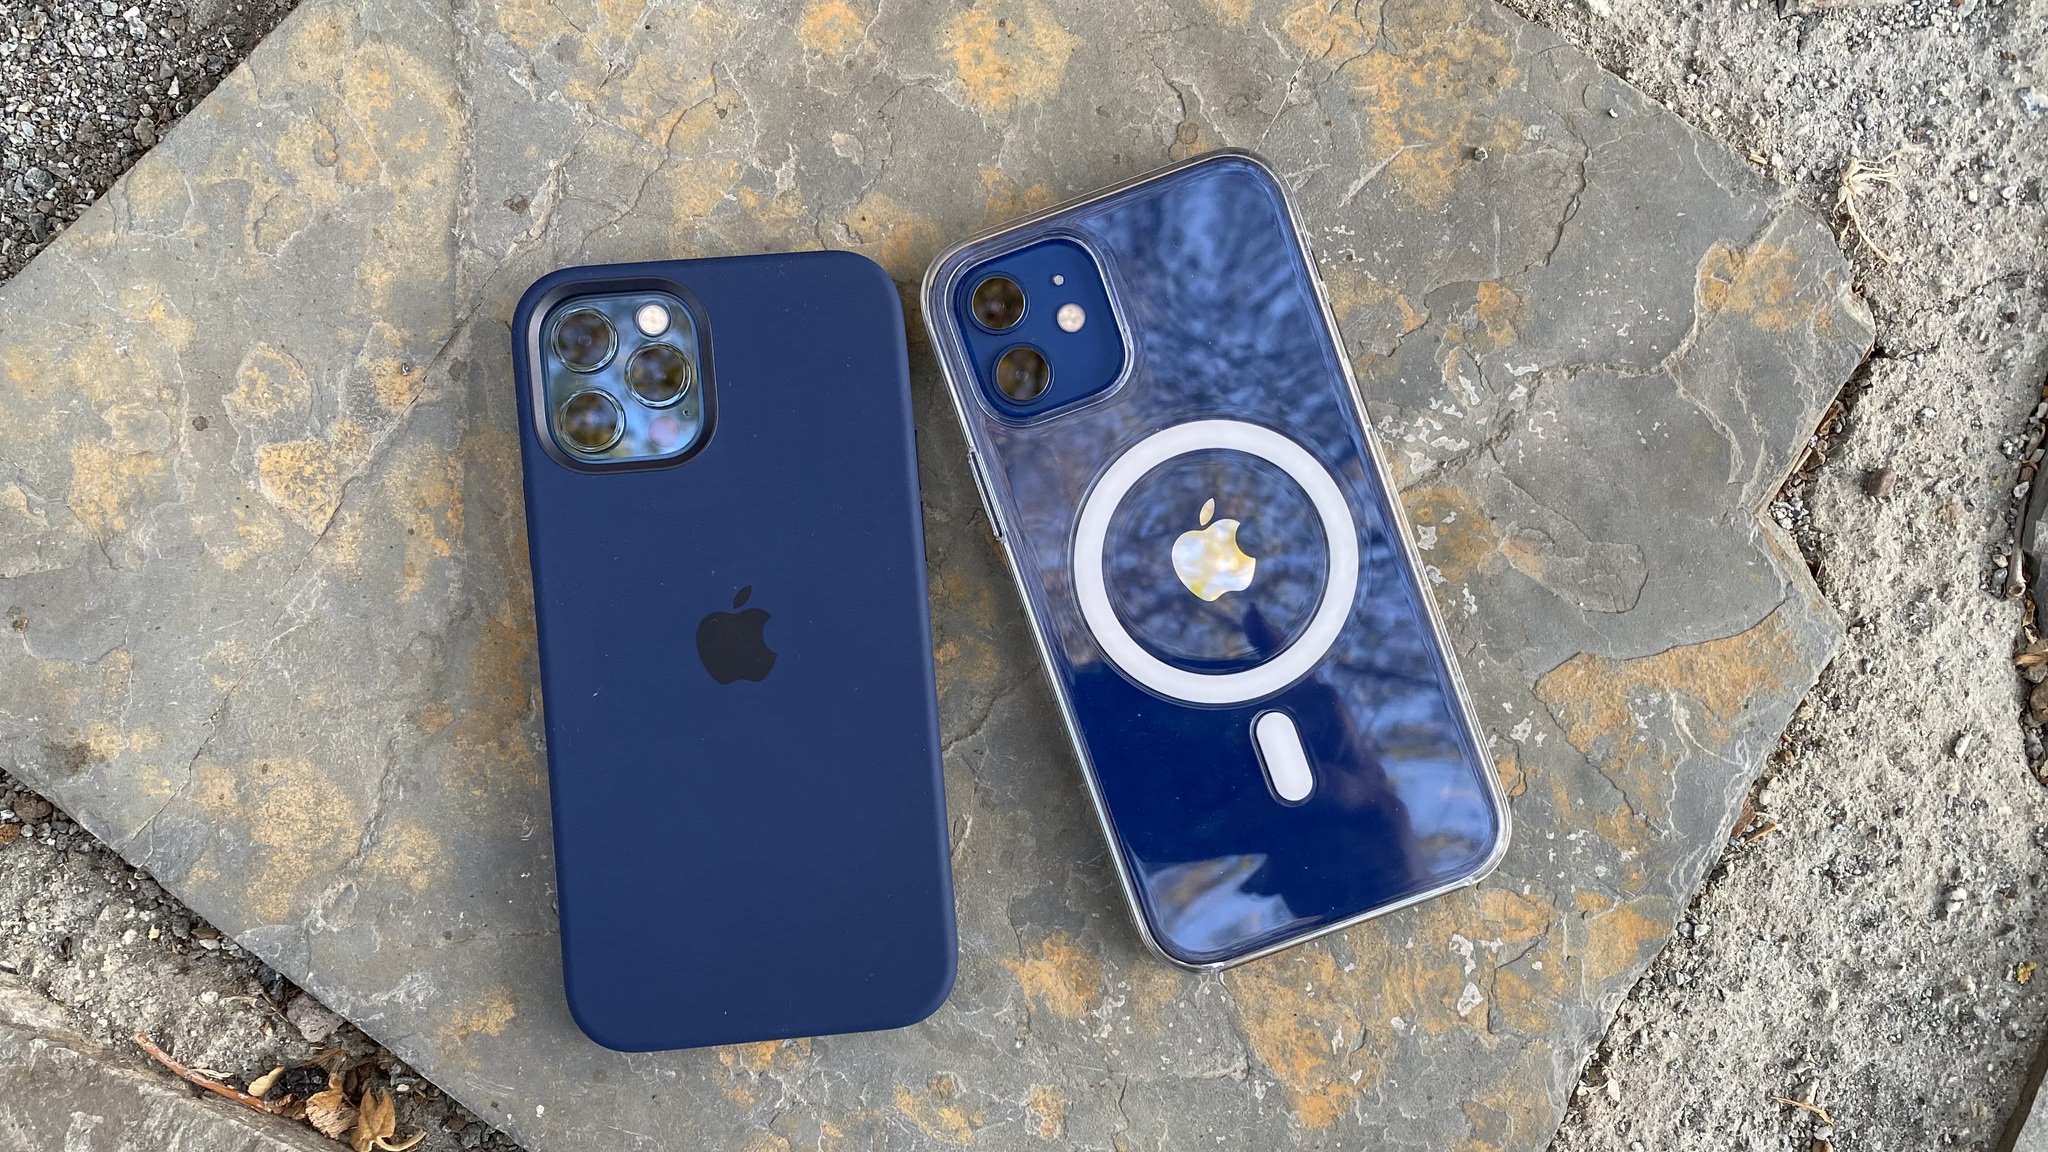 Blue iPhone 12 with transparent MagSafe case